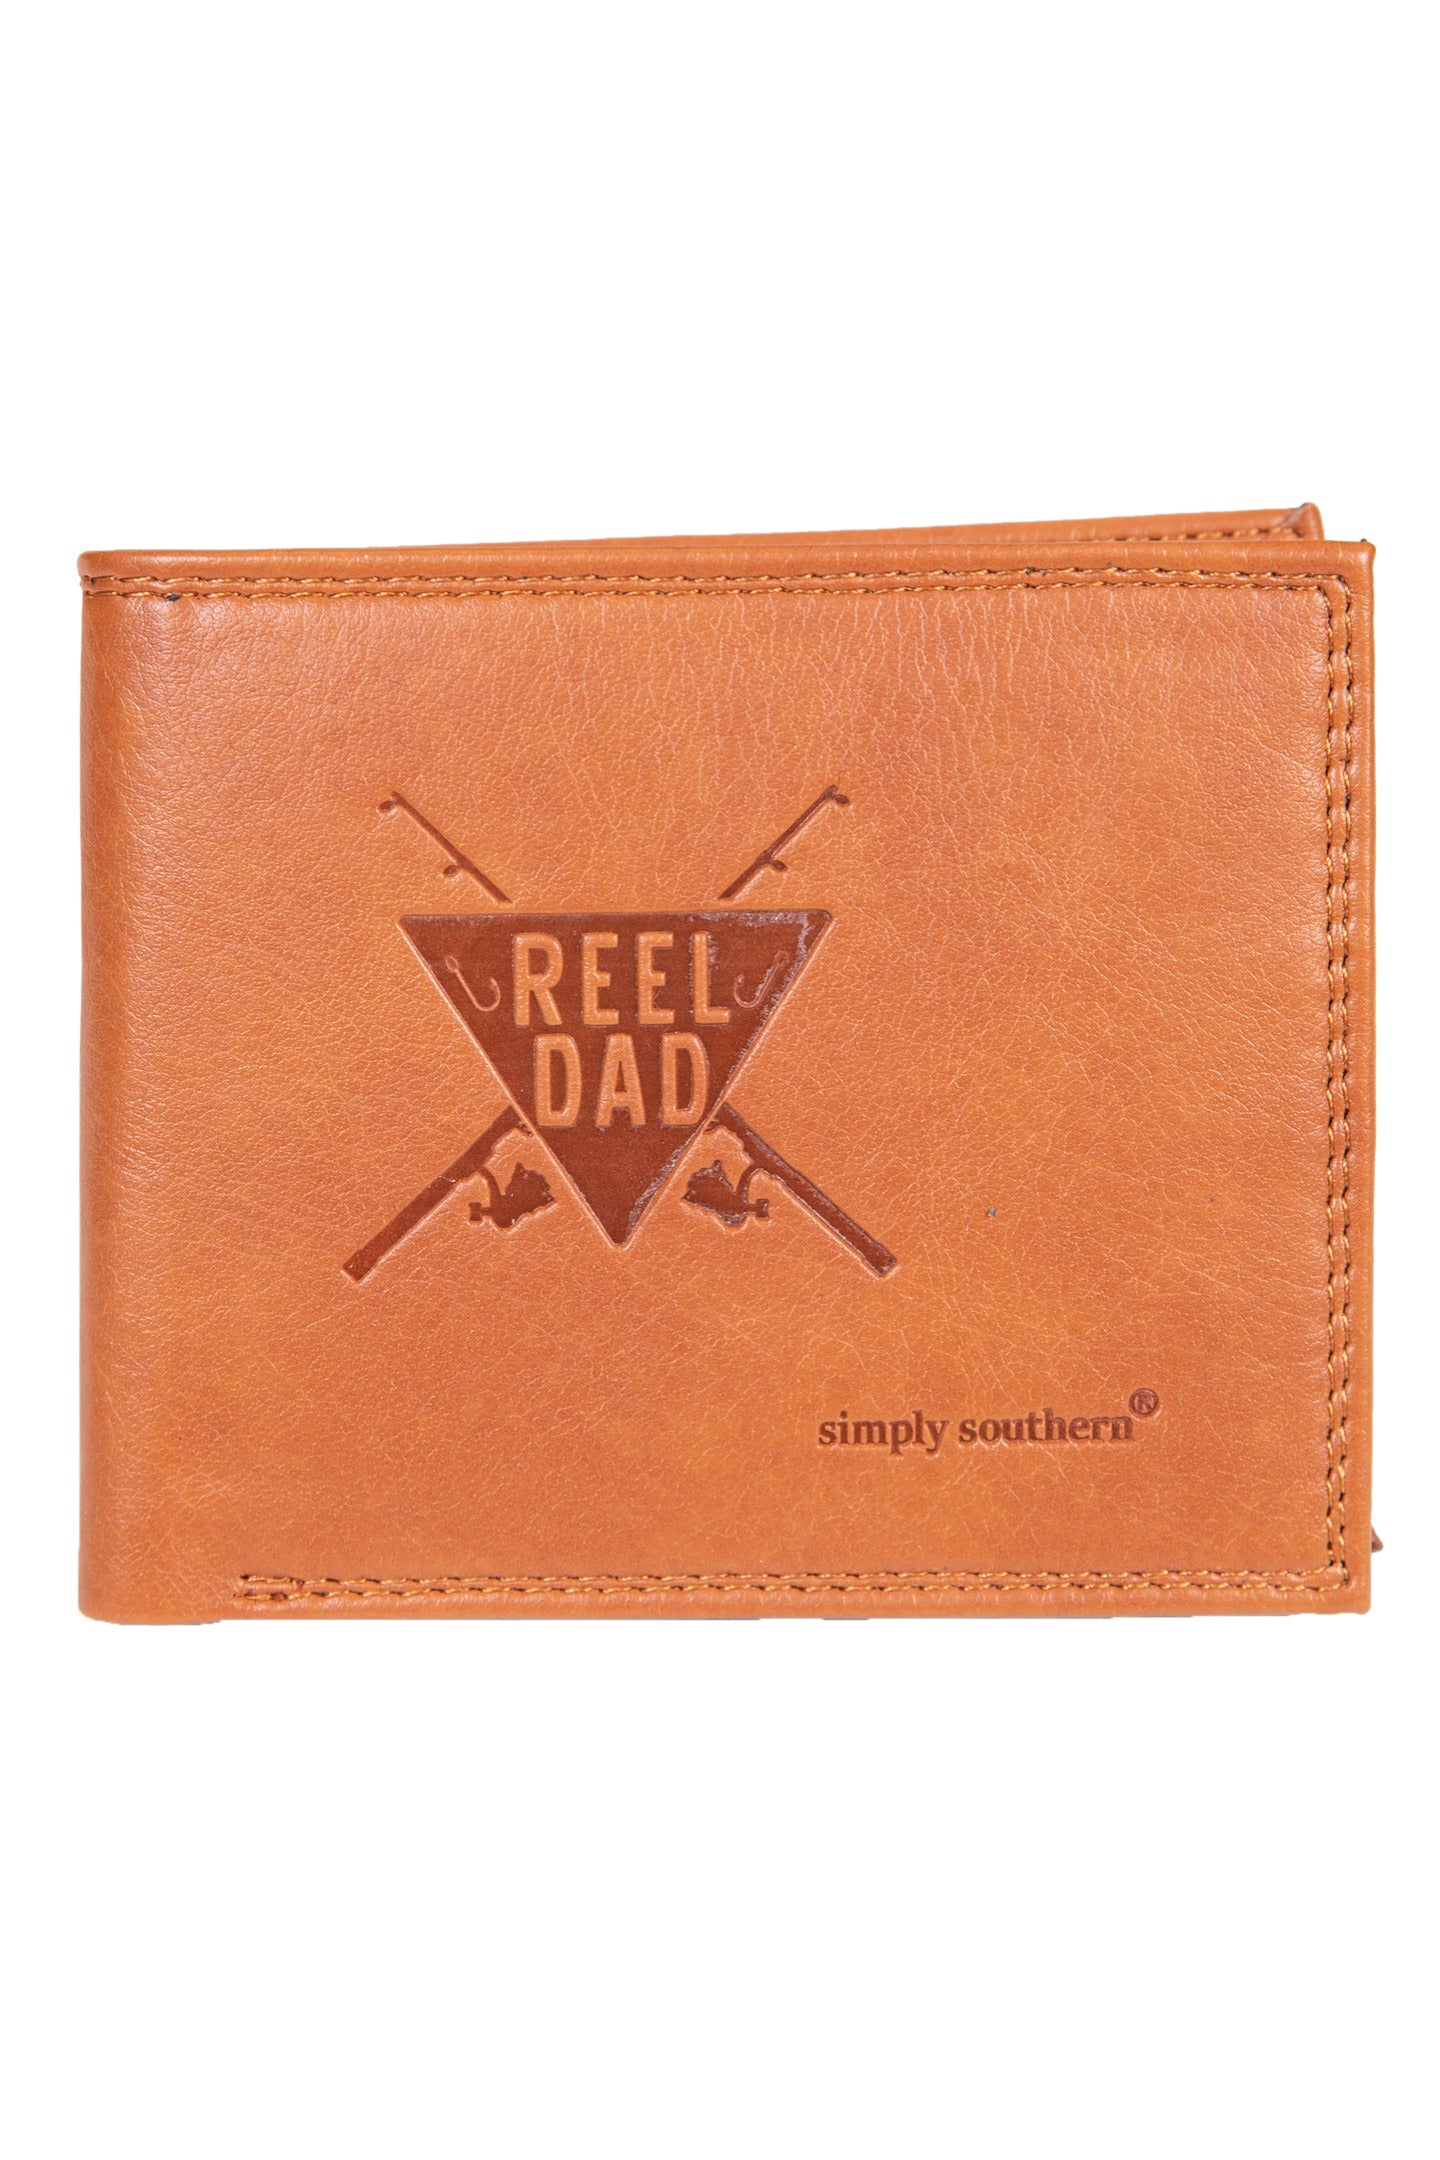 "Reel Dad" Leather Wallet by Simply Southern